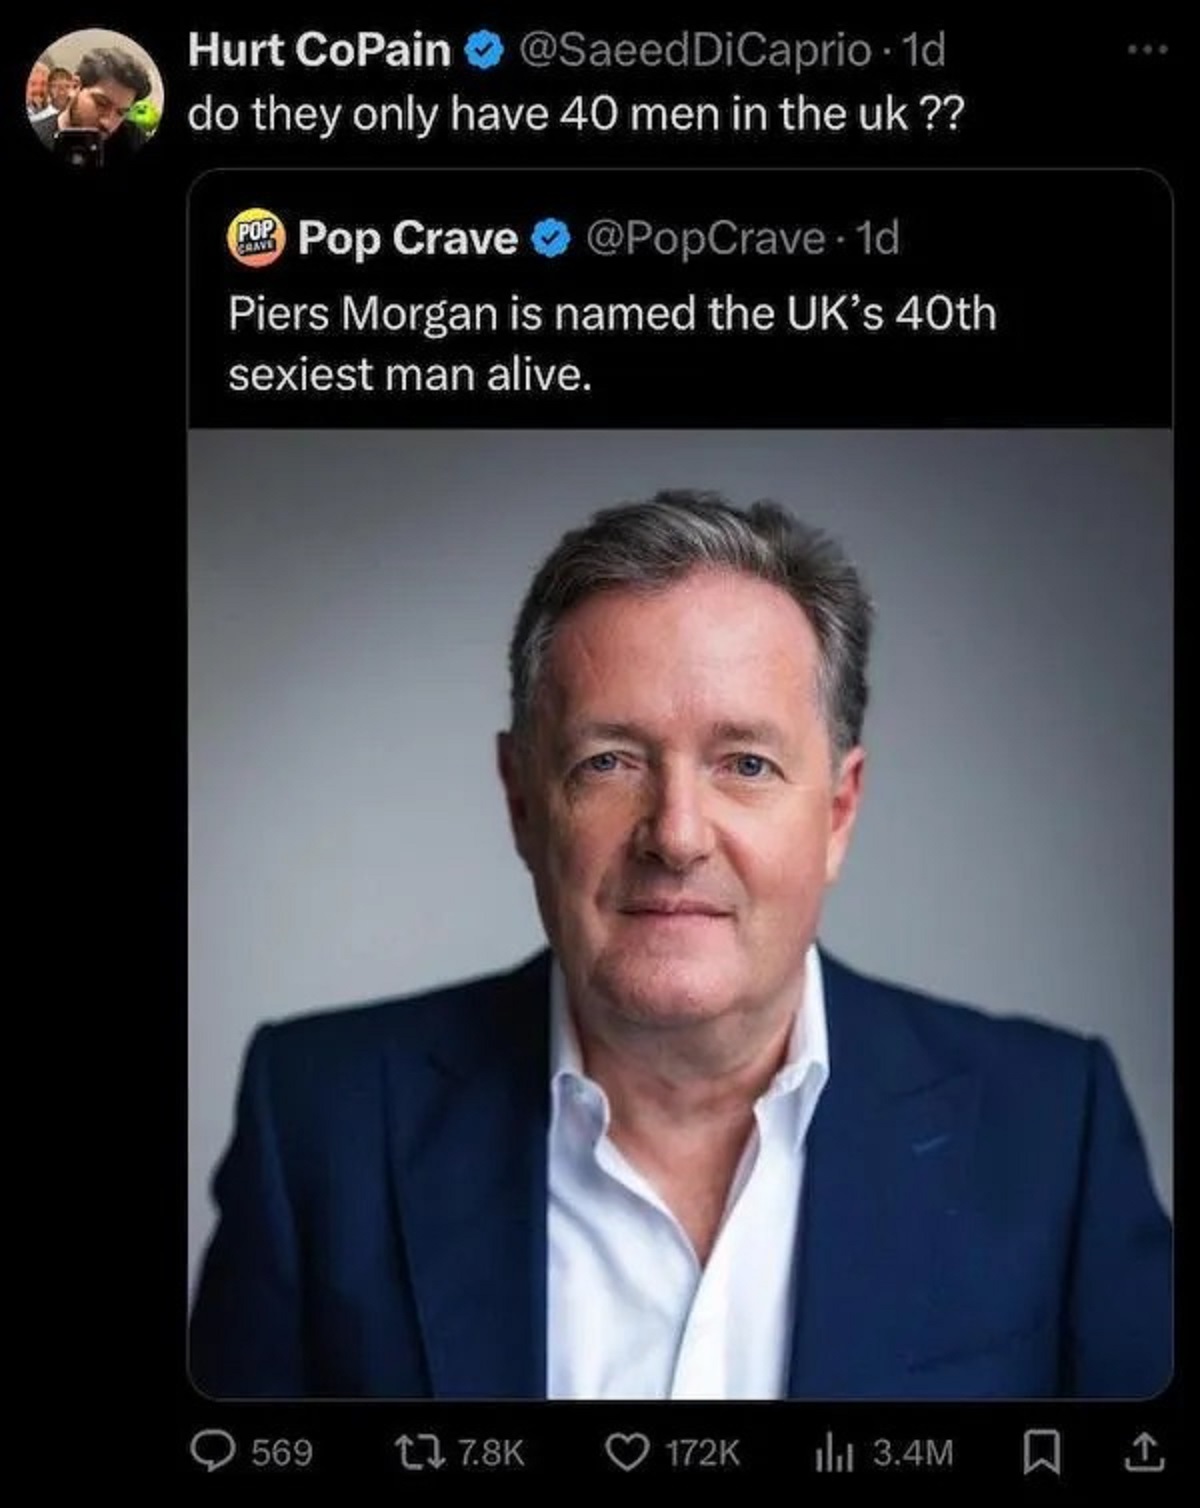 fiona harvey - Hurt CoPain DiCaprio 1d do they only have 40 men in the uk ?? Pop Crave Pop Crave . 1d Piers Morgan is named the Uk's 40th sexiest man alive. 569 ili 3.4M